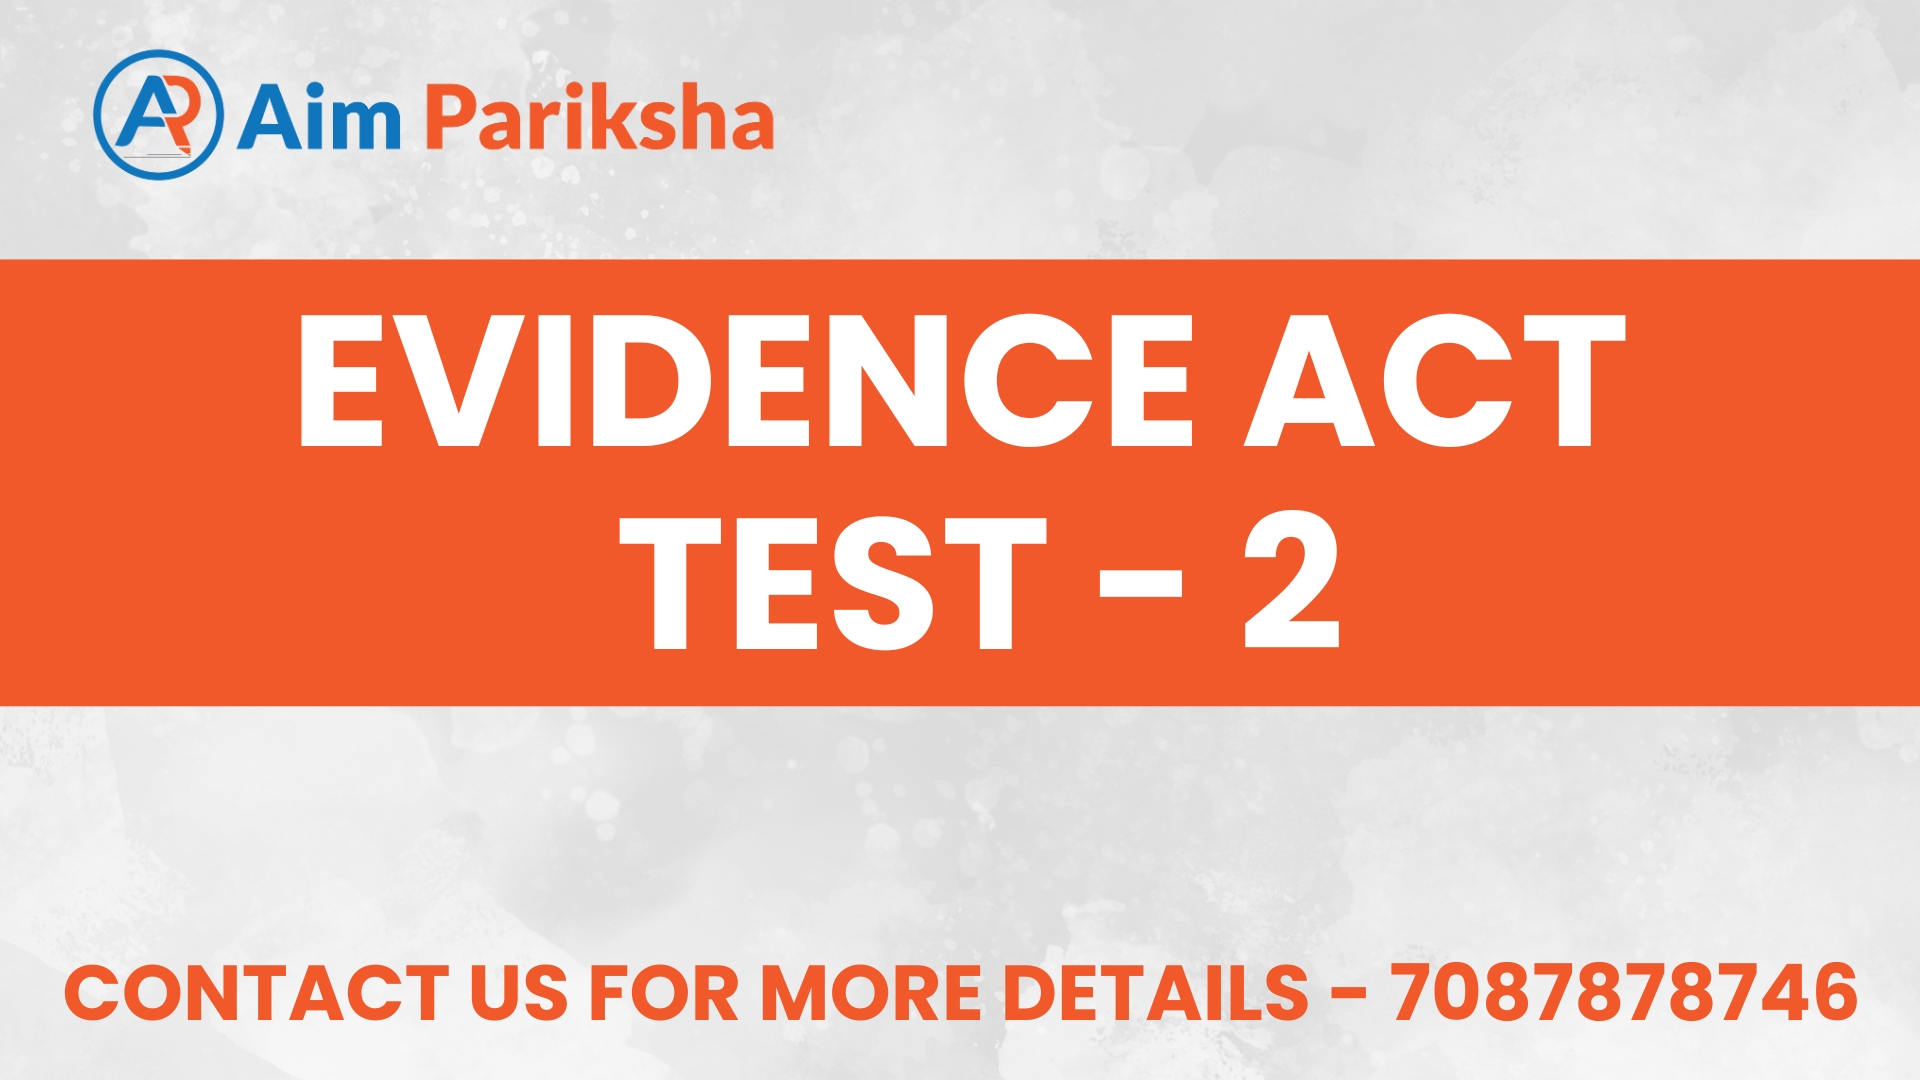 Evidence Act Test - 2